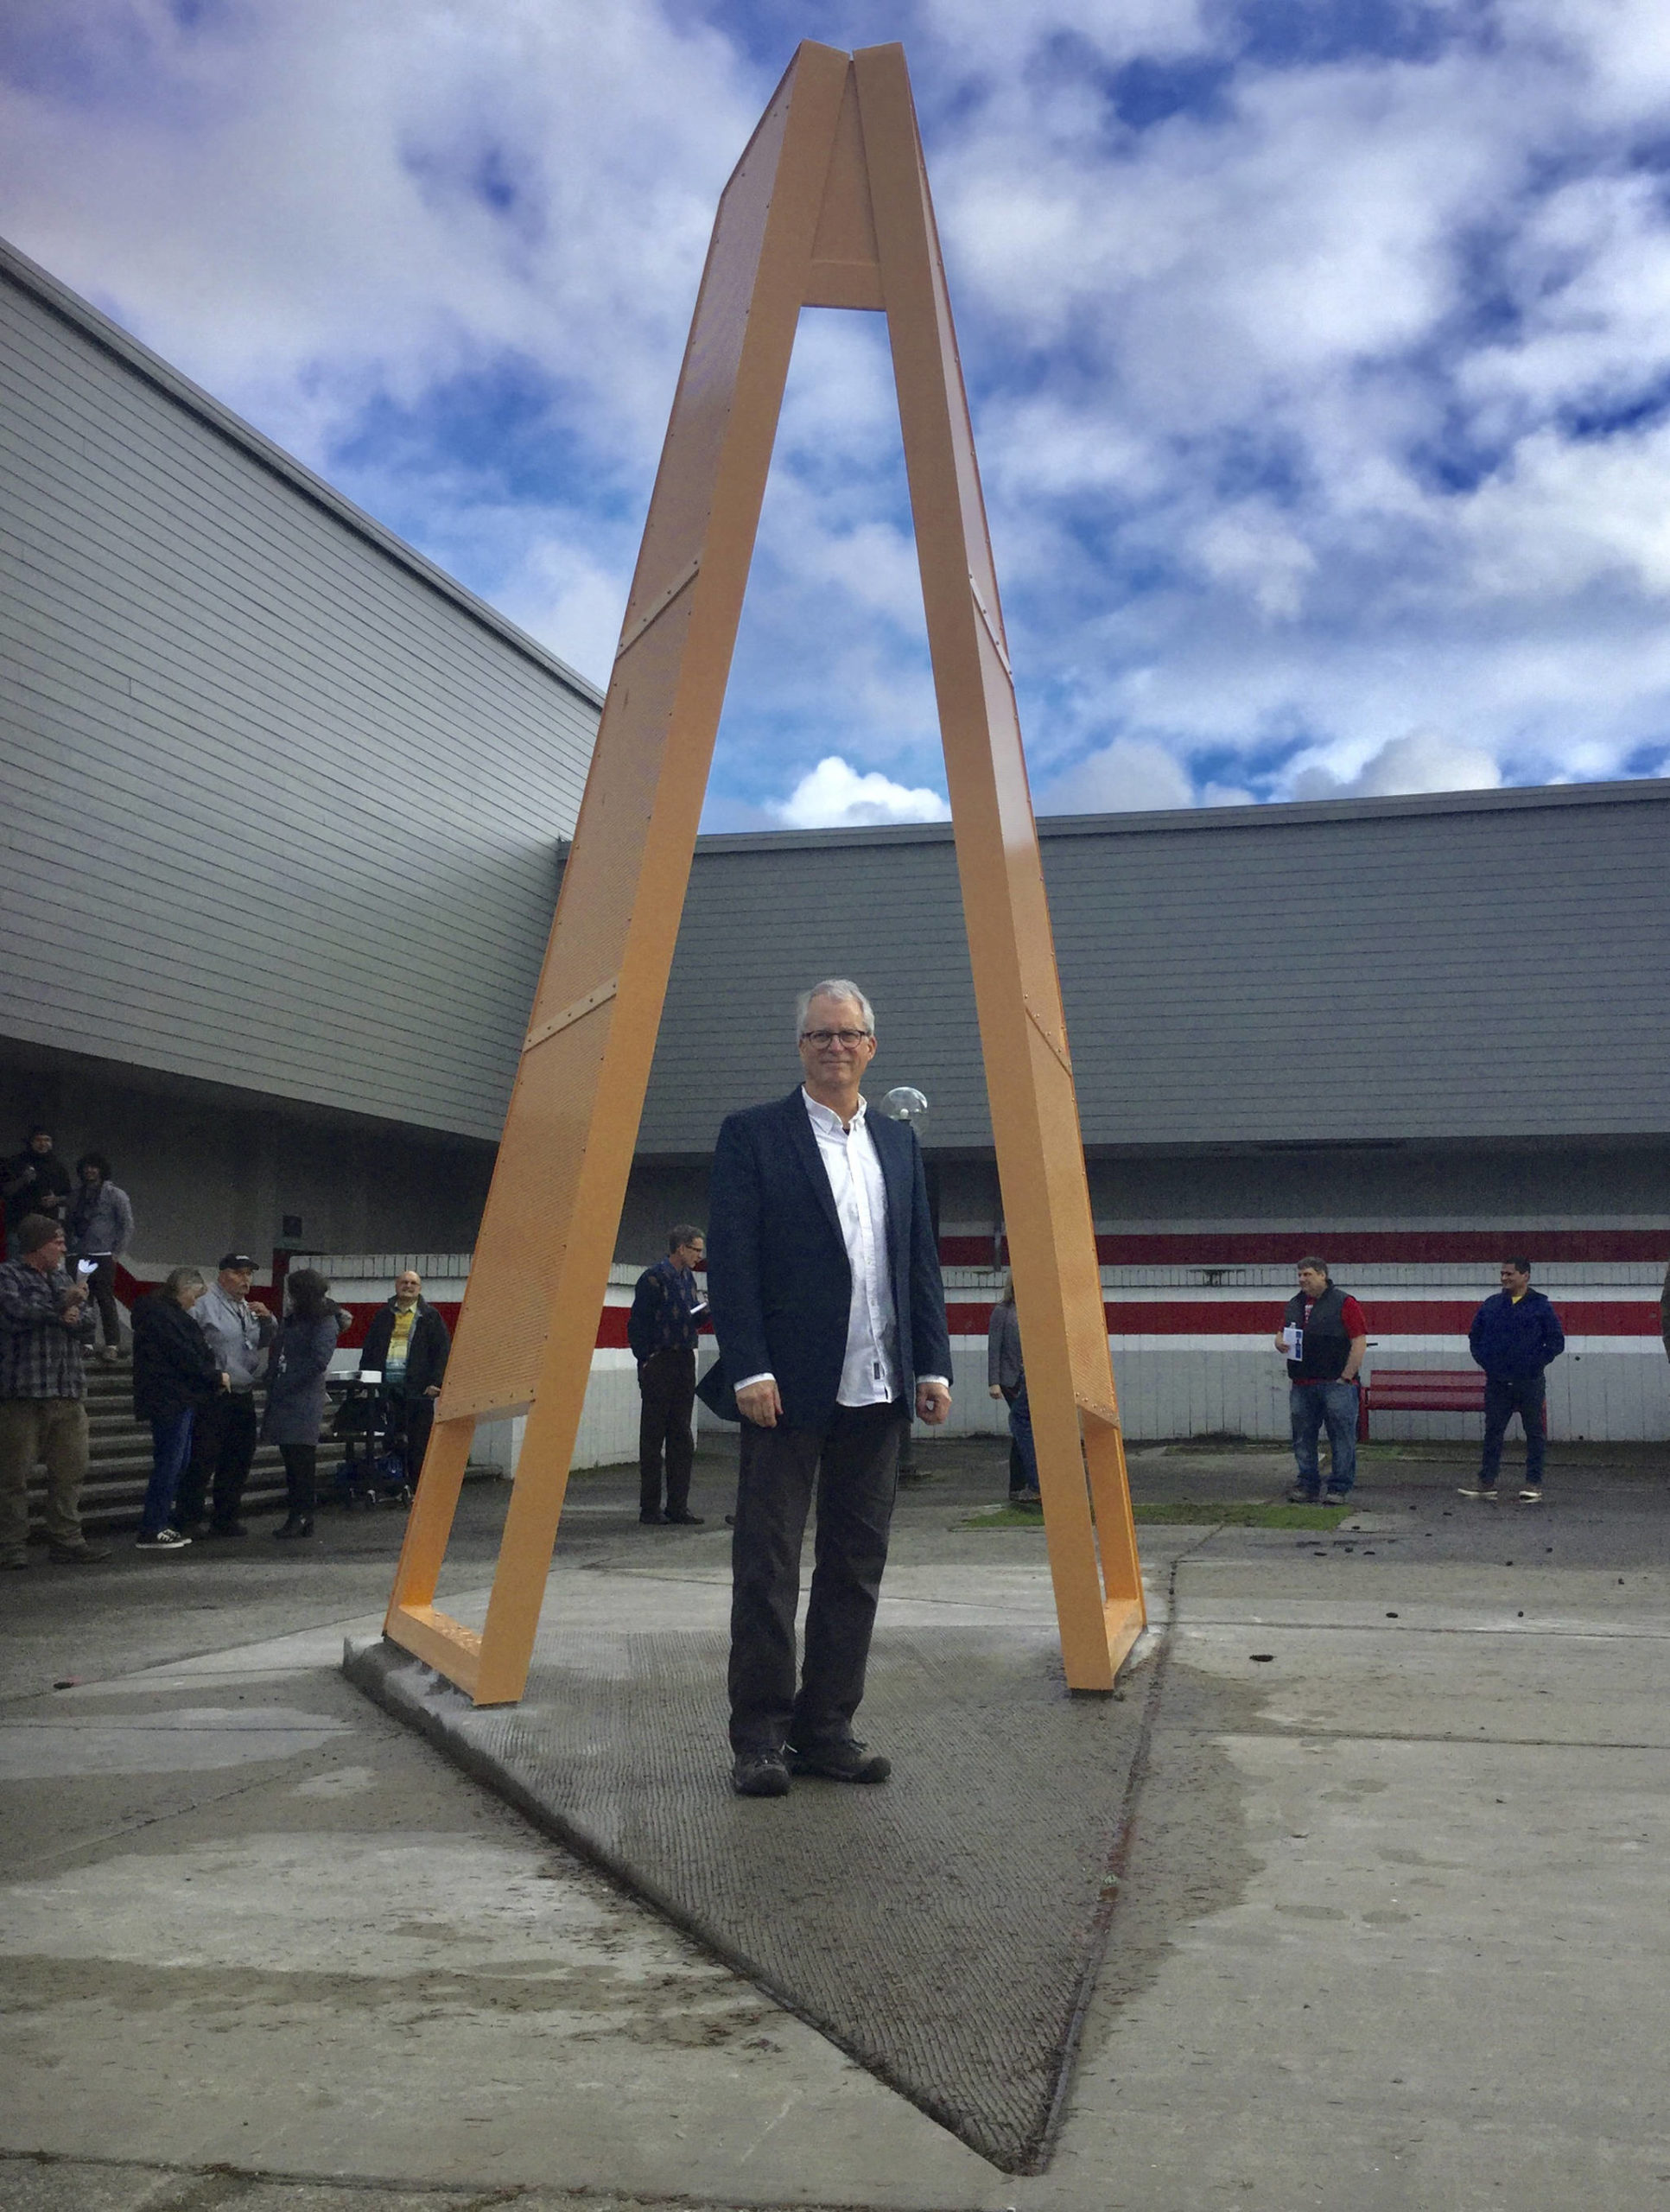 Artist Roger Feldman, professor emeritus at Seattle Pacific University, passes through his newest sculpture, “HopeGate” unveiled Friday at a ceremony outside Marysville-Pilchuck High School. The interactive sculpture combines Salish Sea Native American elements with a design that invites teens to pass through heading due west and “lean into the future.”